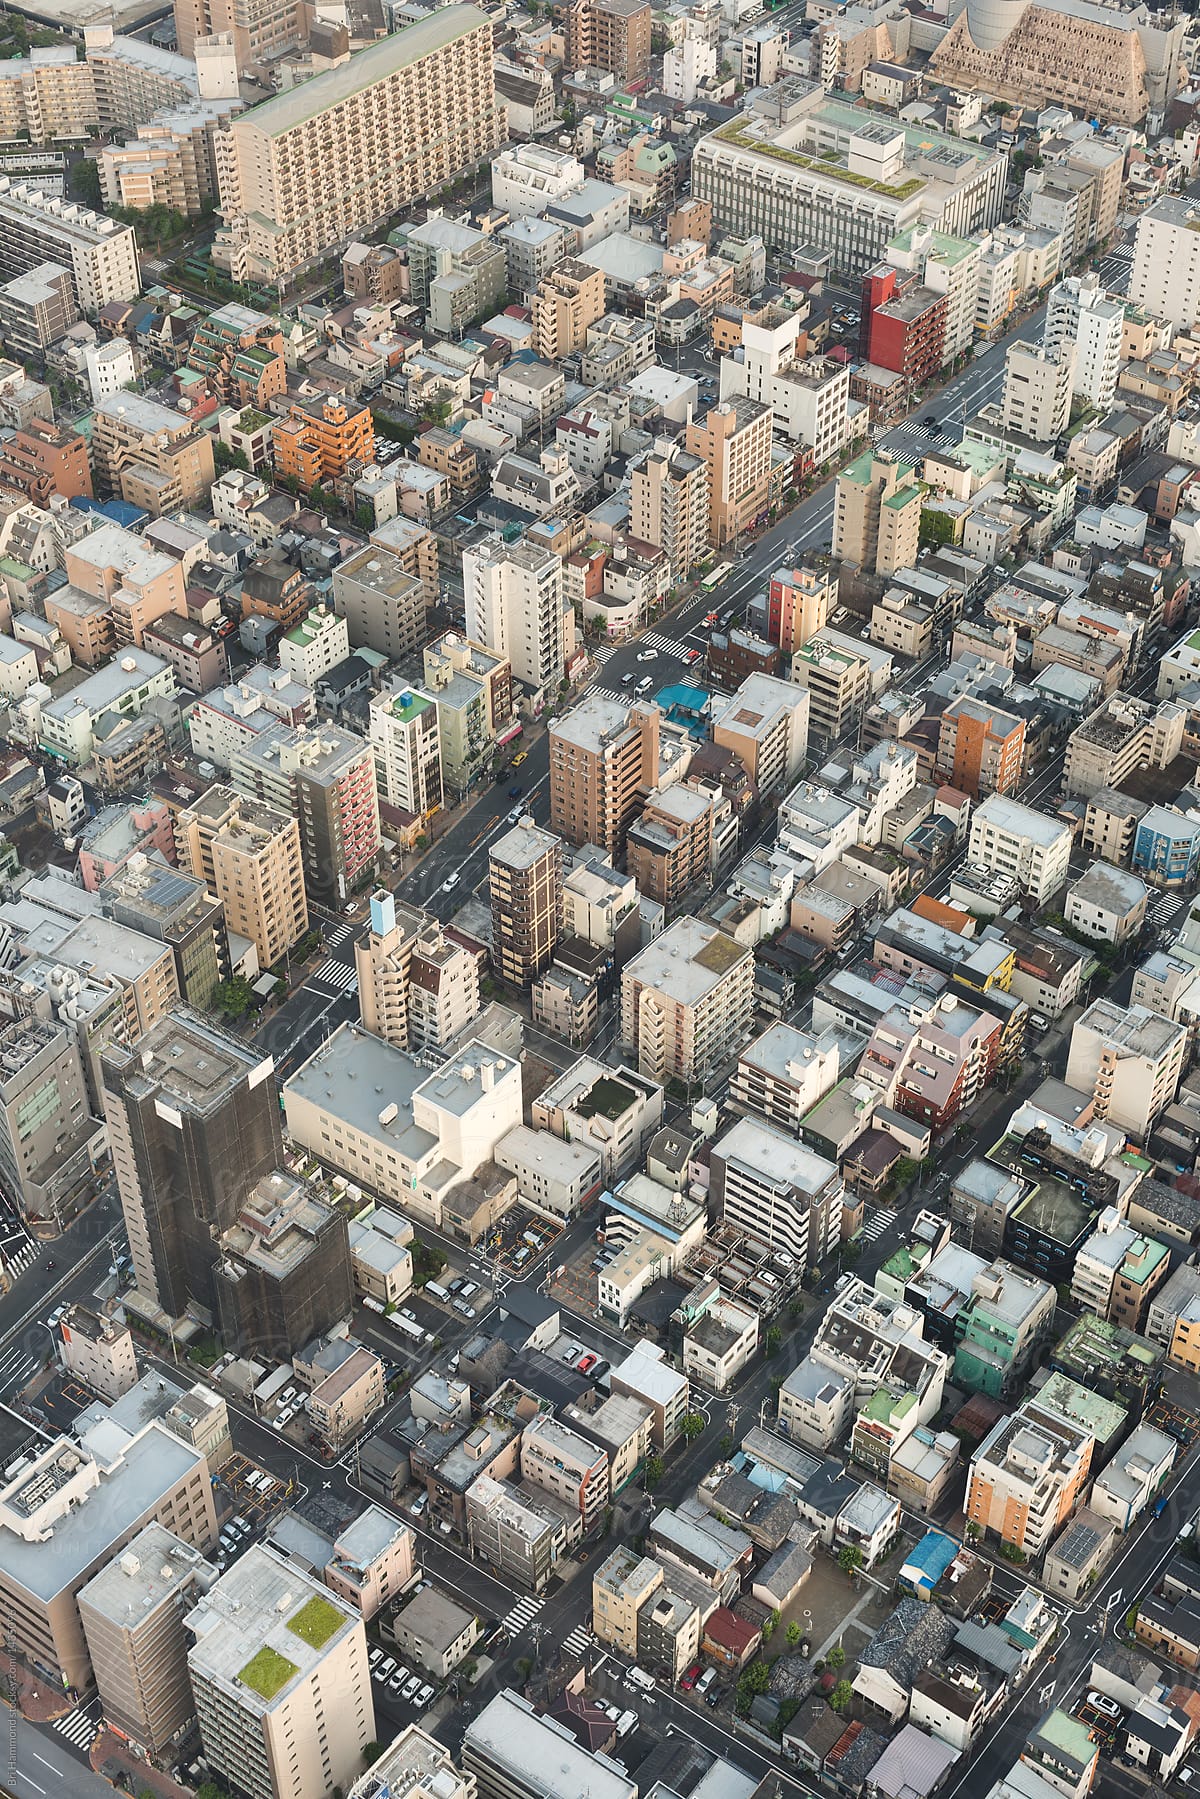 buildings in tokyo from above